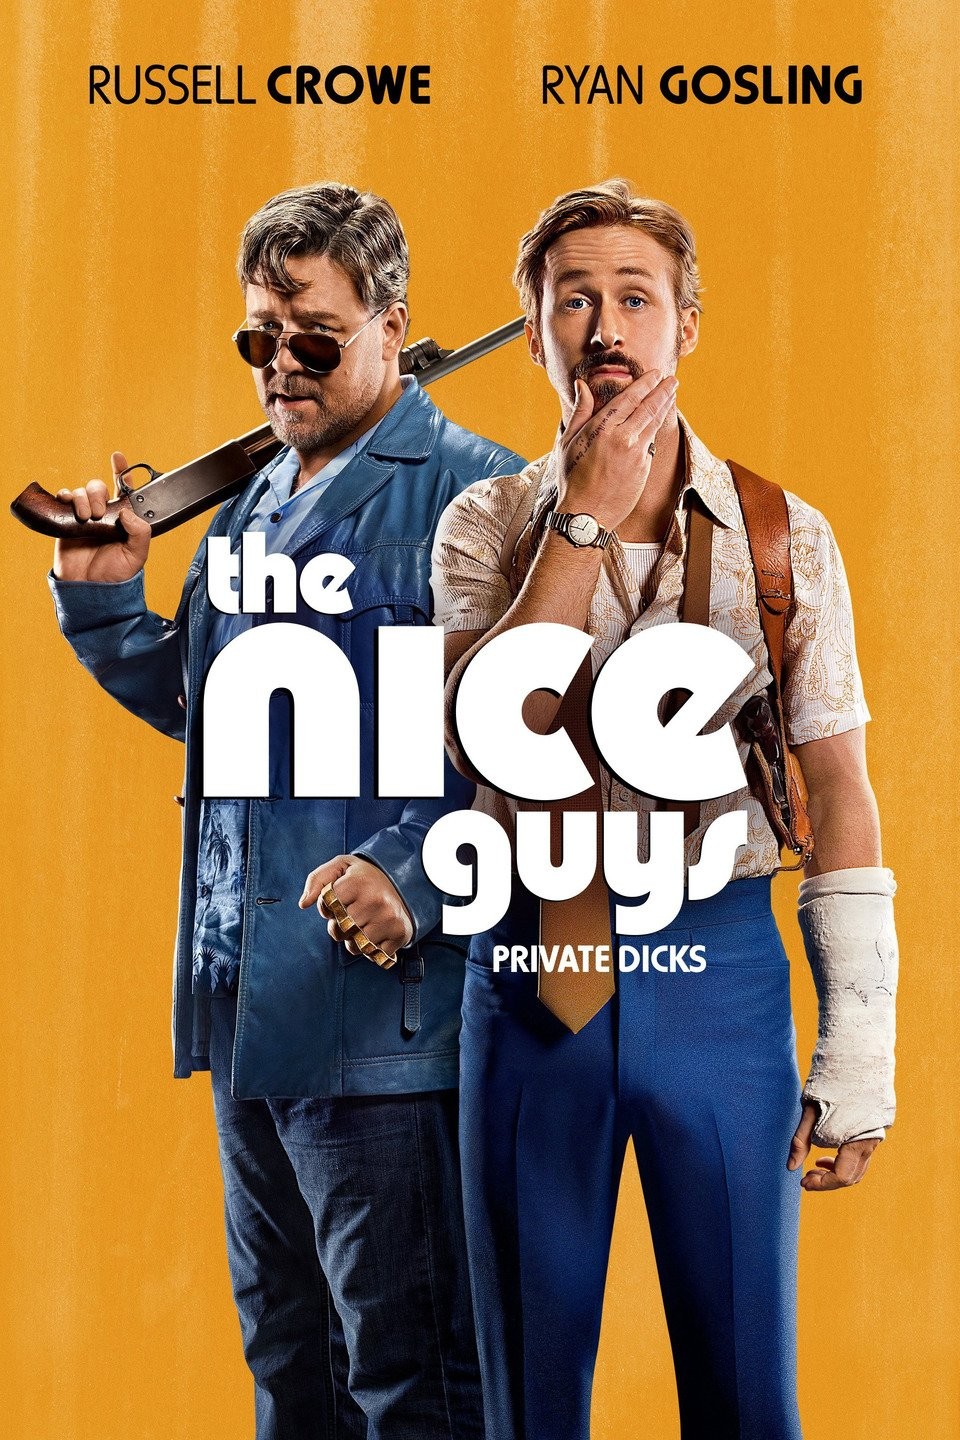 Is Play It Cool, Guys good? TV Show Review - A Good Movie to Watch